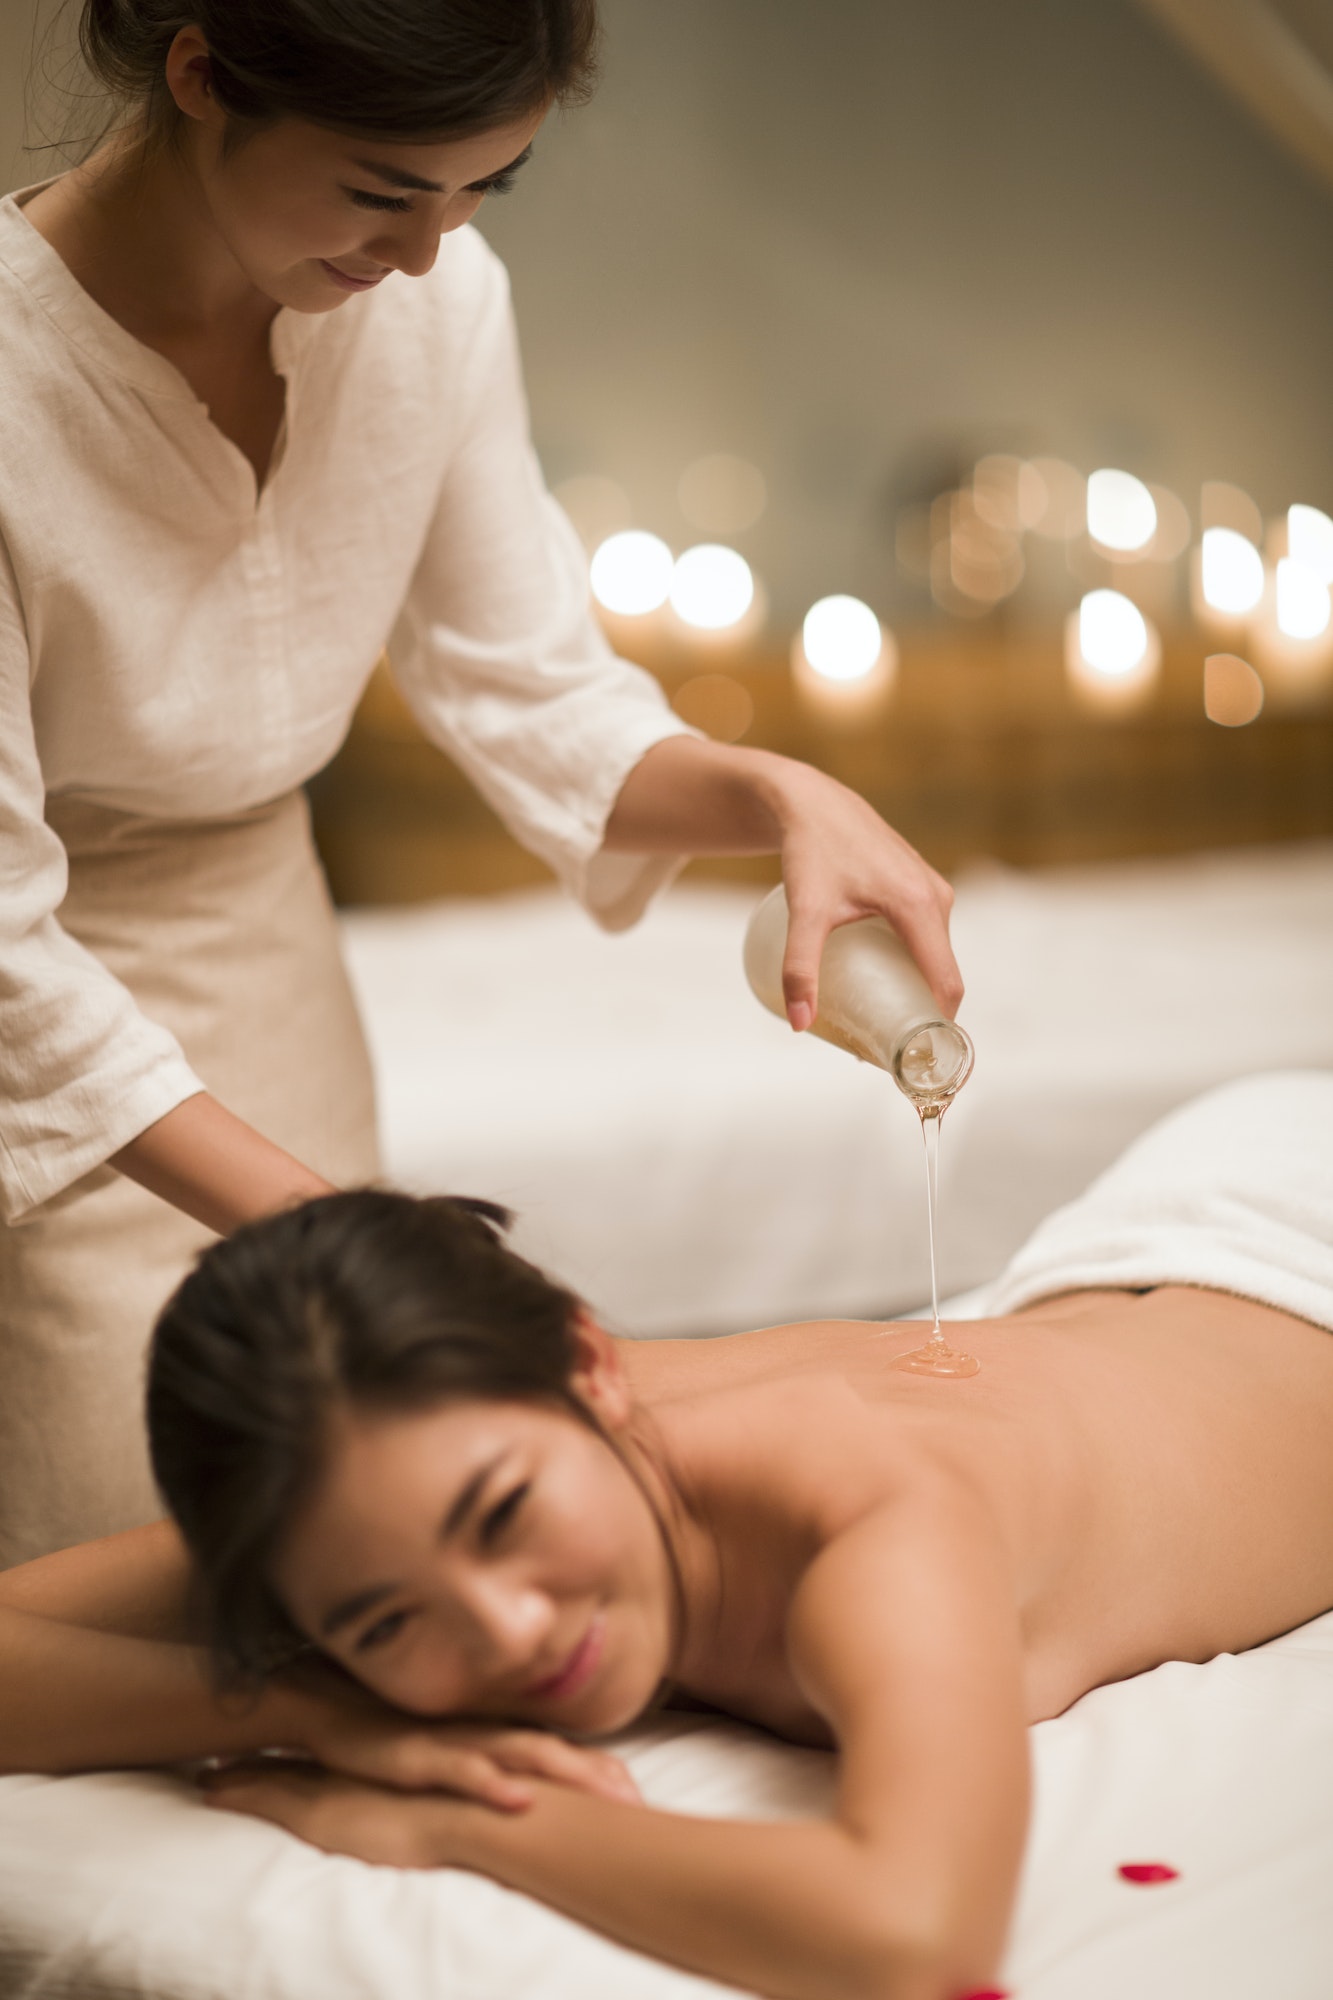 Young woman receiving back massage at spa center